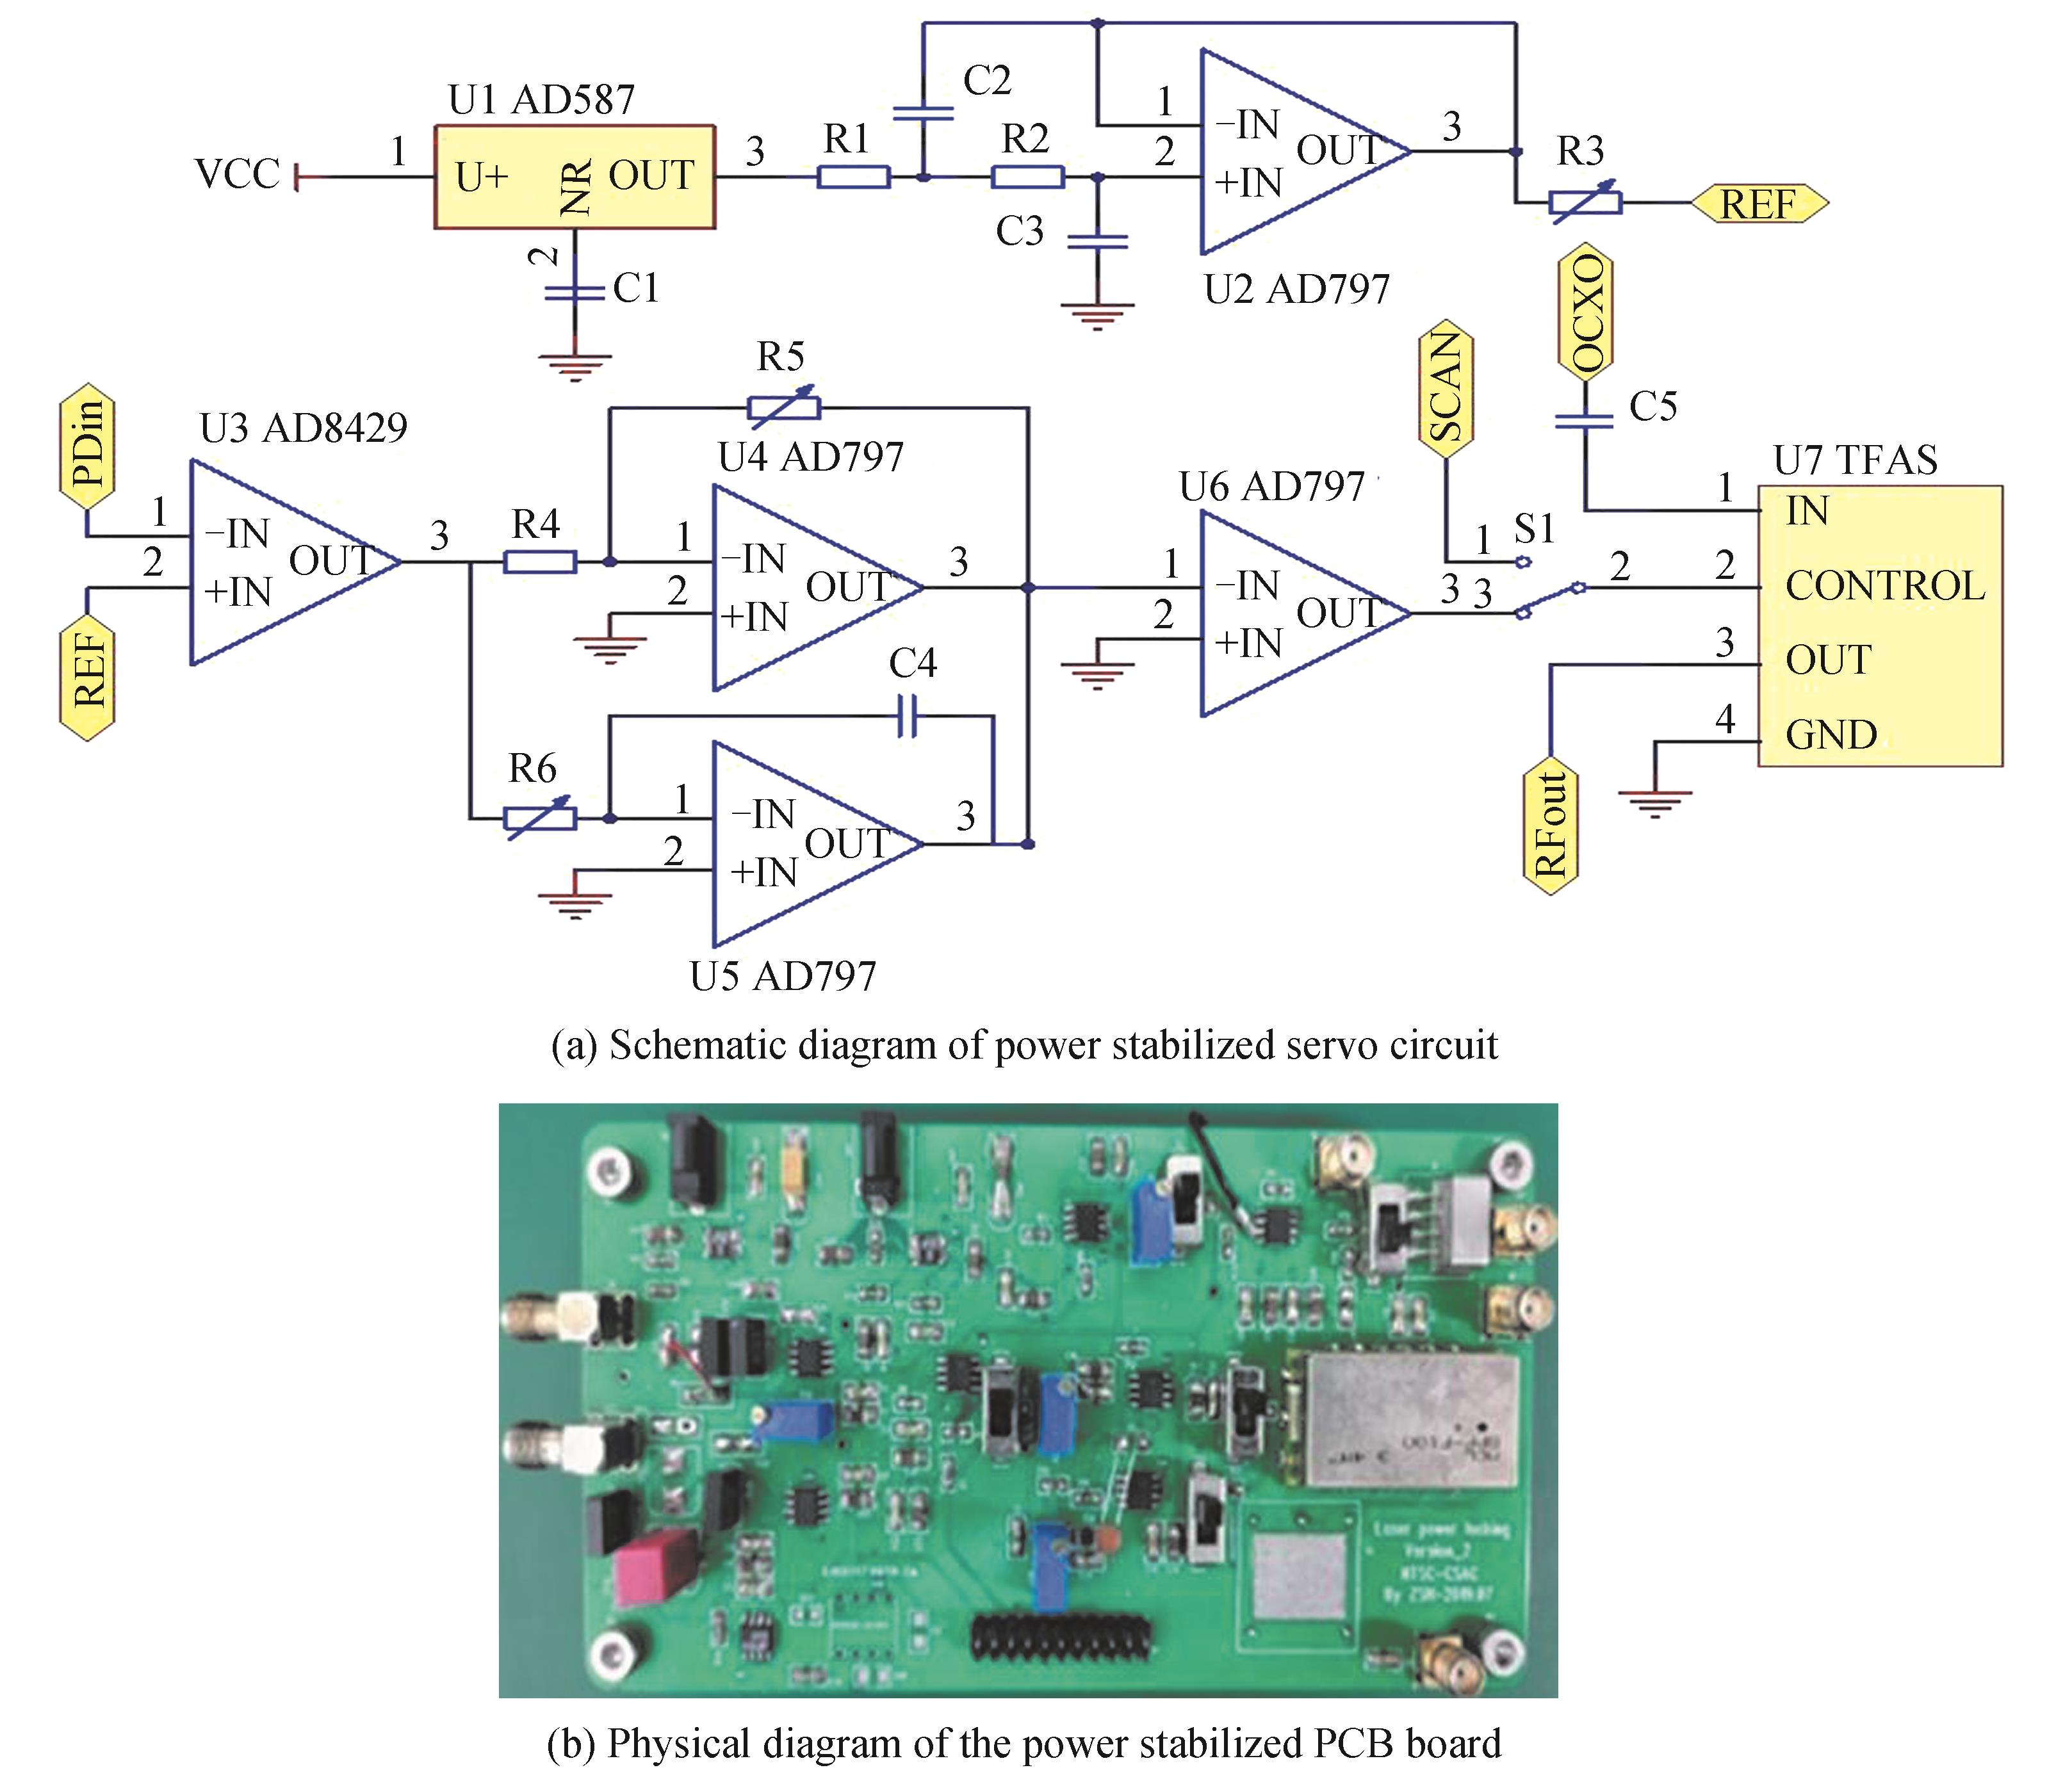 Power stability circuit schematic diagram and PCB physical diagram